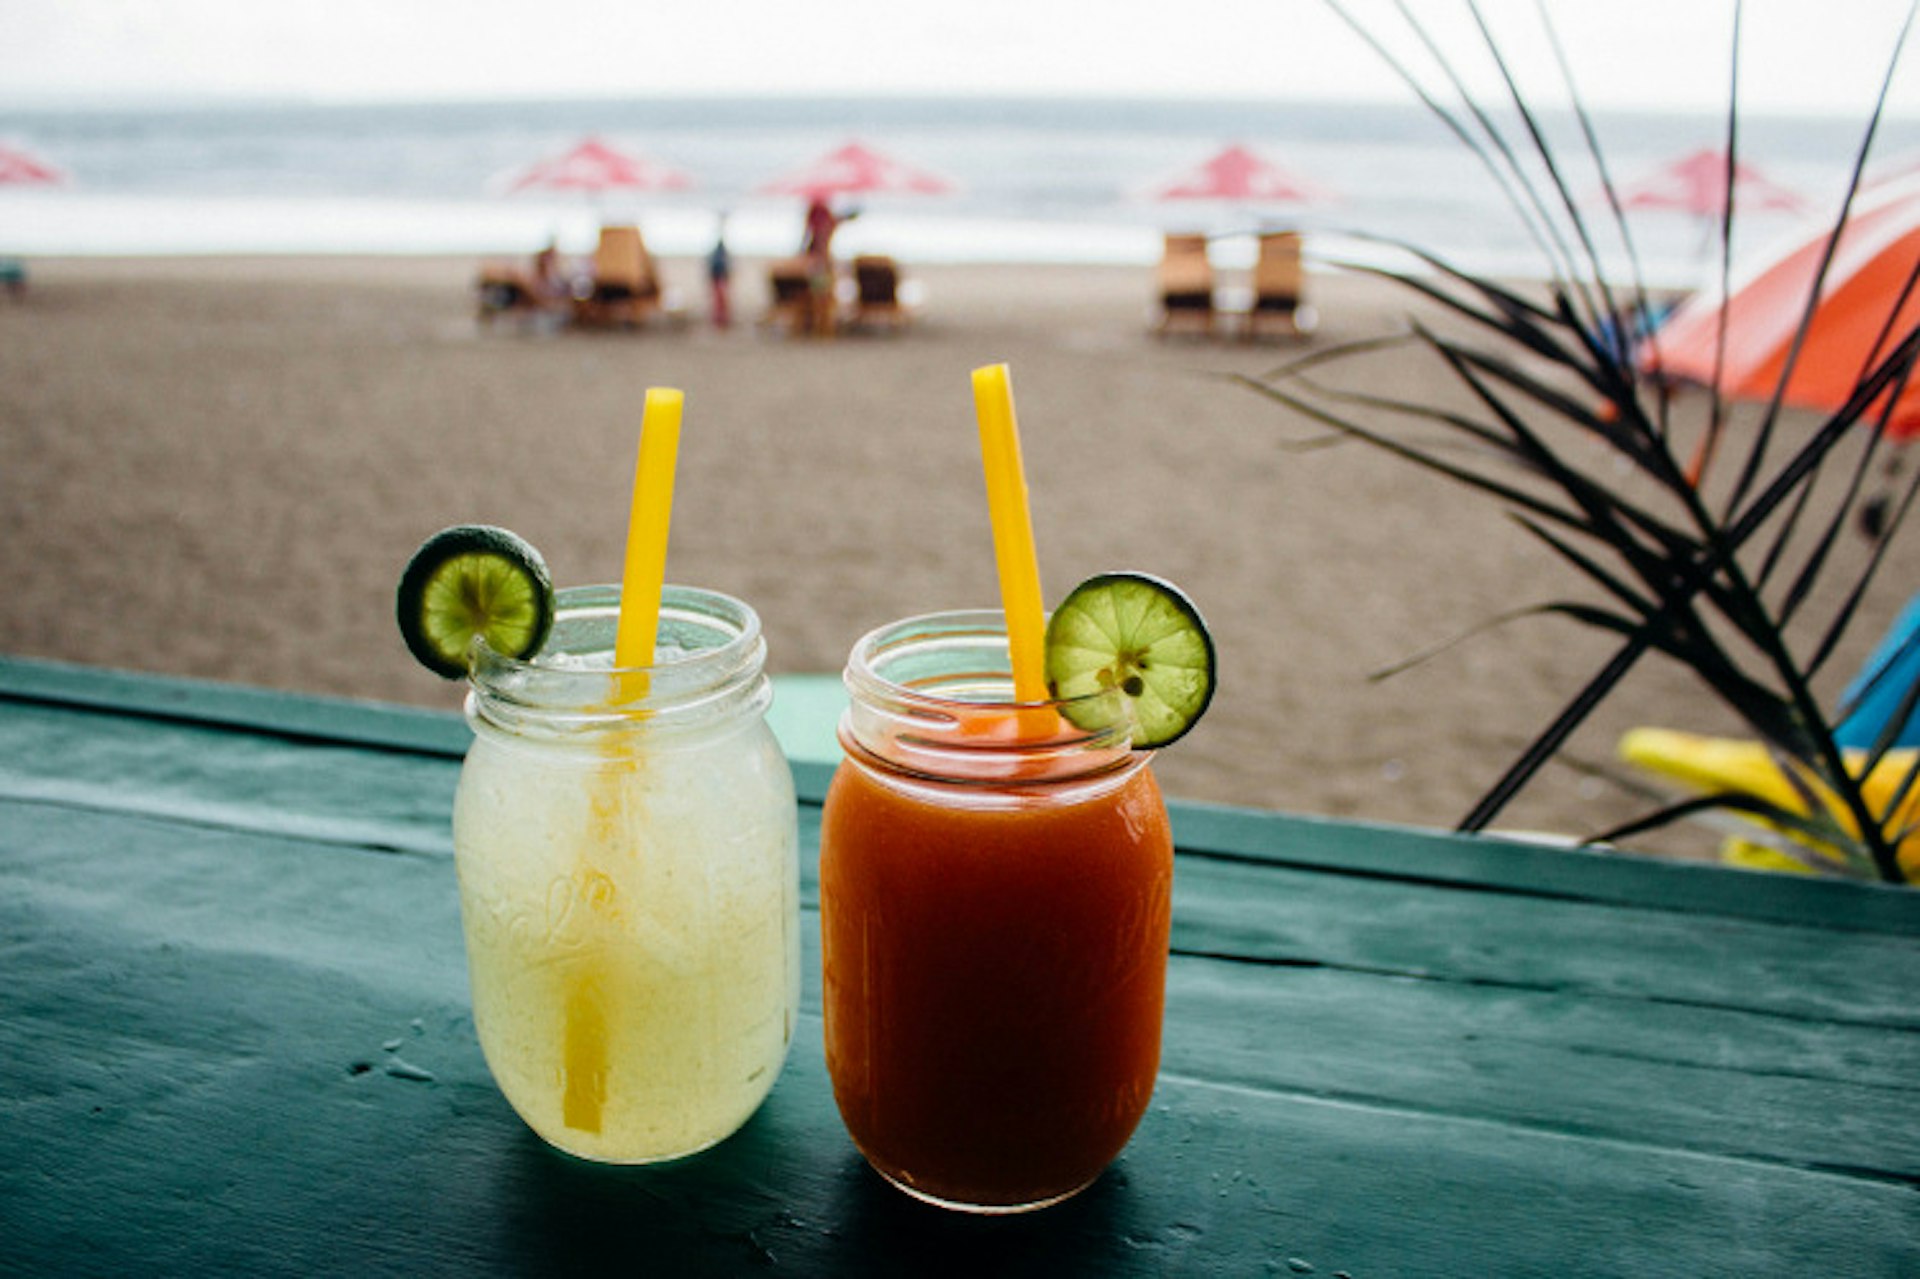 Cocktails on the beach, Seminyak, Bali. Image by Andreia CC BY 2.0